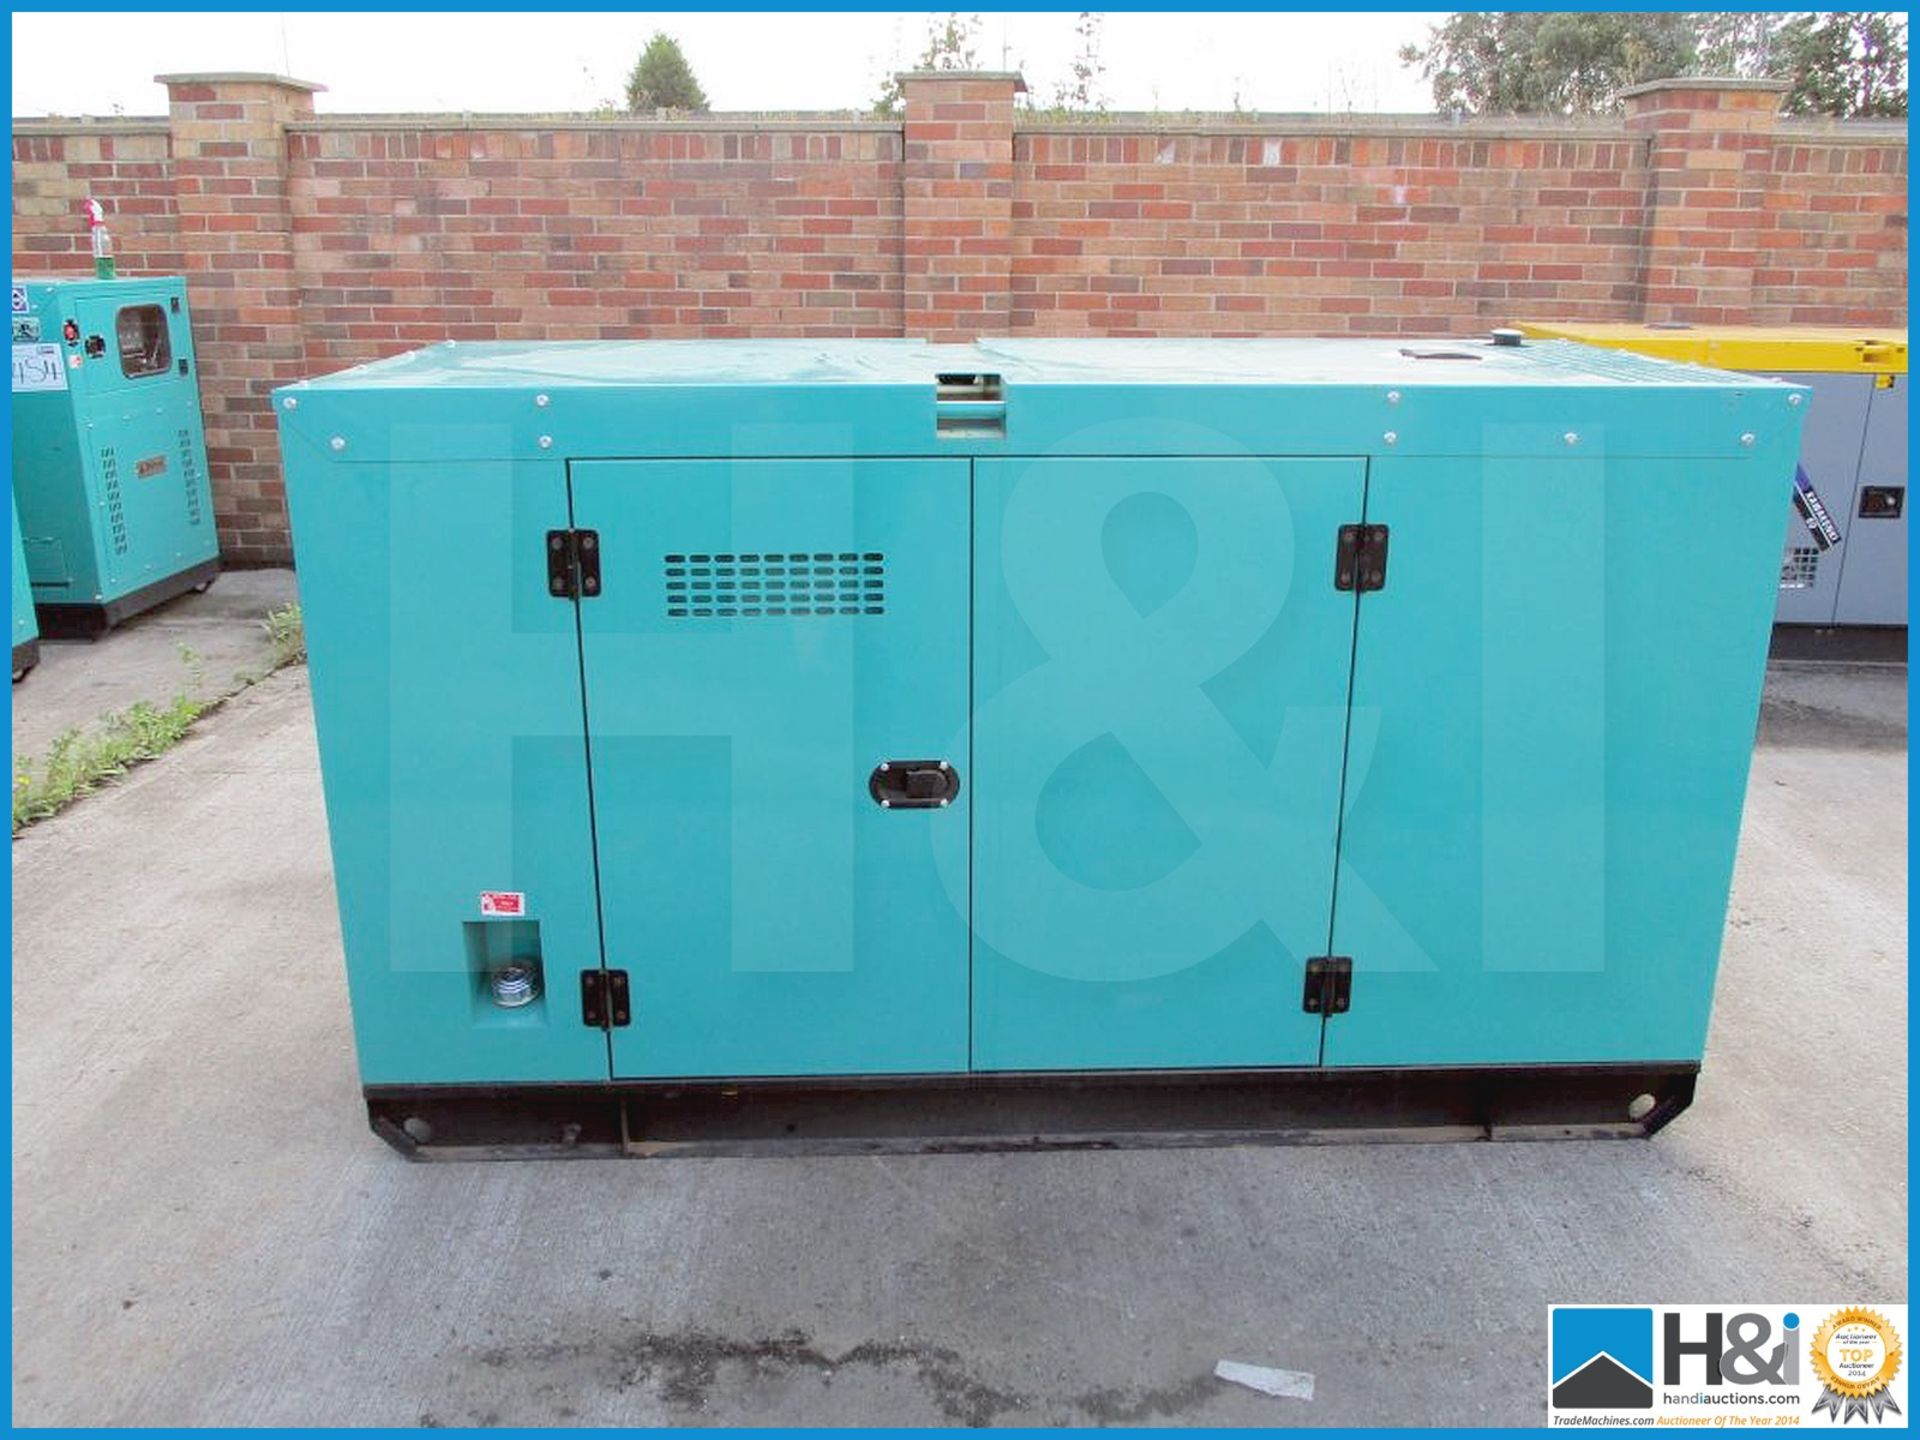 Brand new, unused Danyo 100KvA diesel generator. No oil or water and ready for transportation. Singl